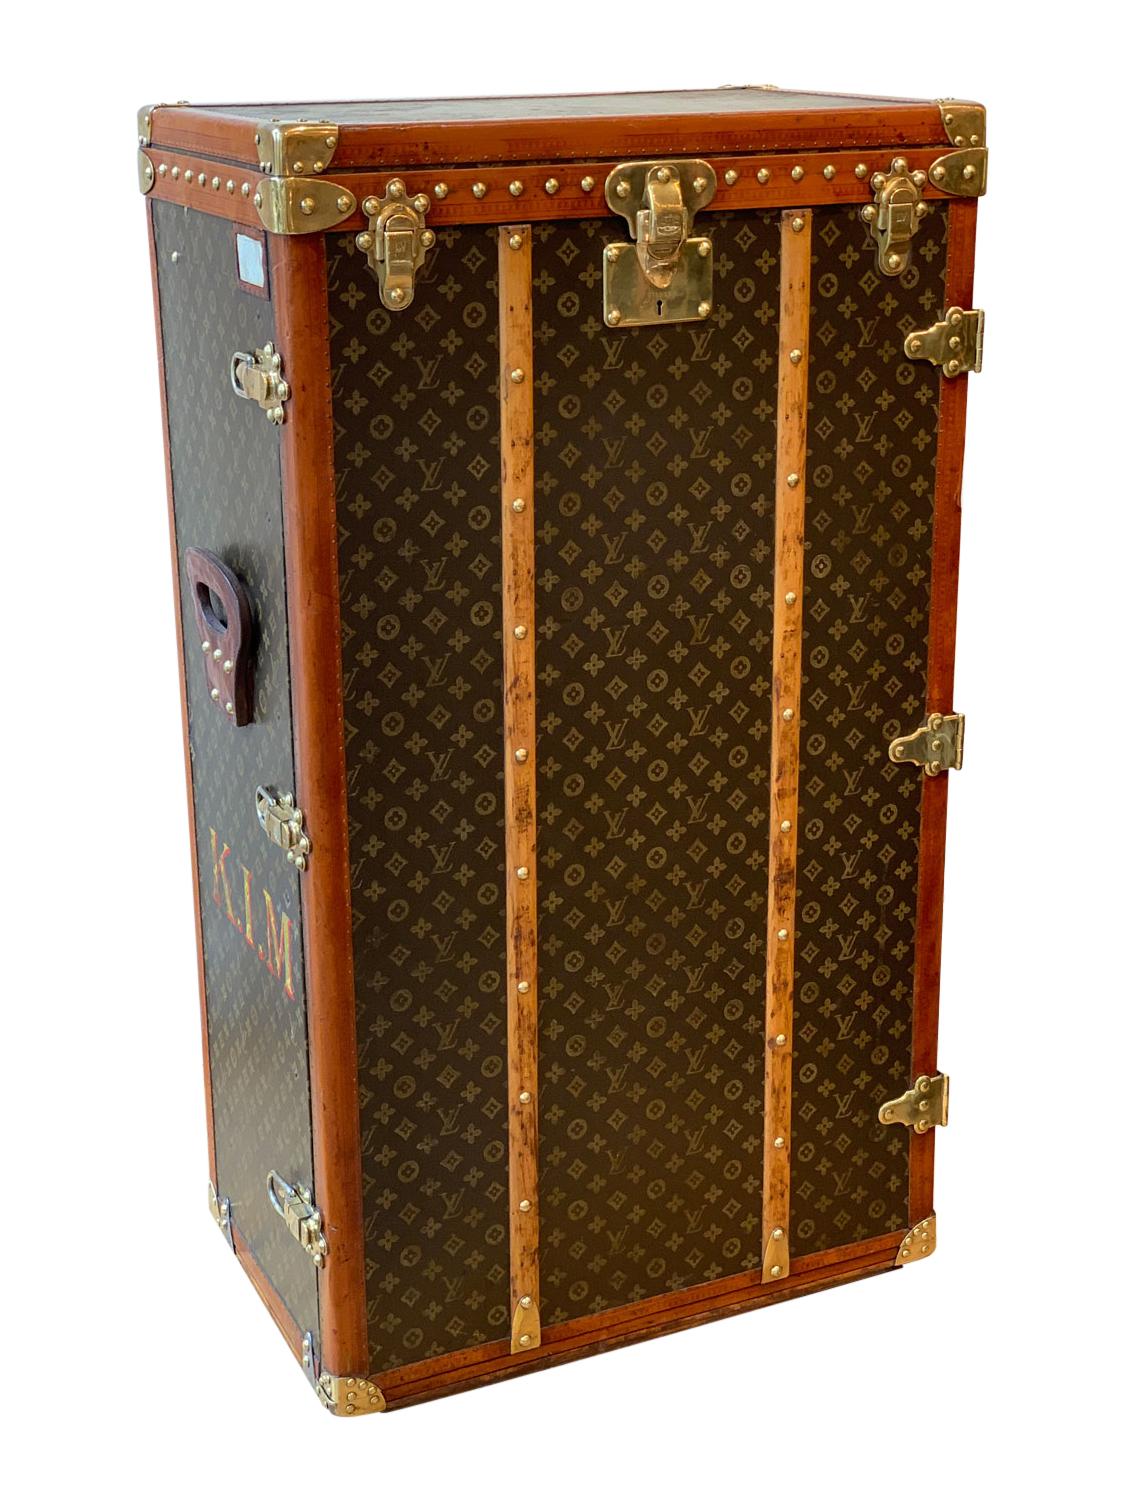 A Louis Vuitton Lily Pons Shoe Trunk, circa 1925 in L.V. monogrammed canvas. The trunk is complete and original with the initials K.I.M to each side. The trunk is fitted for thirty pairs of shoes and compartments top and bottom for silk stockings.